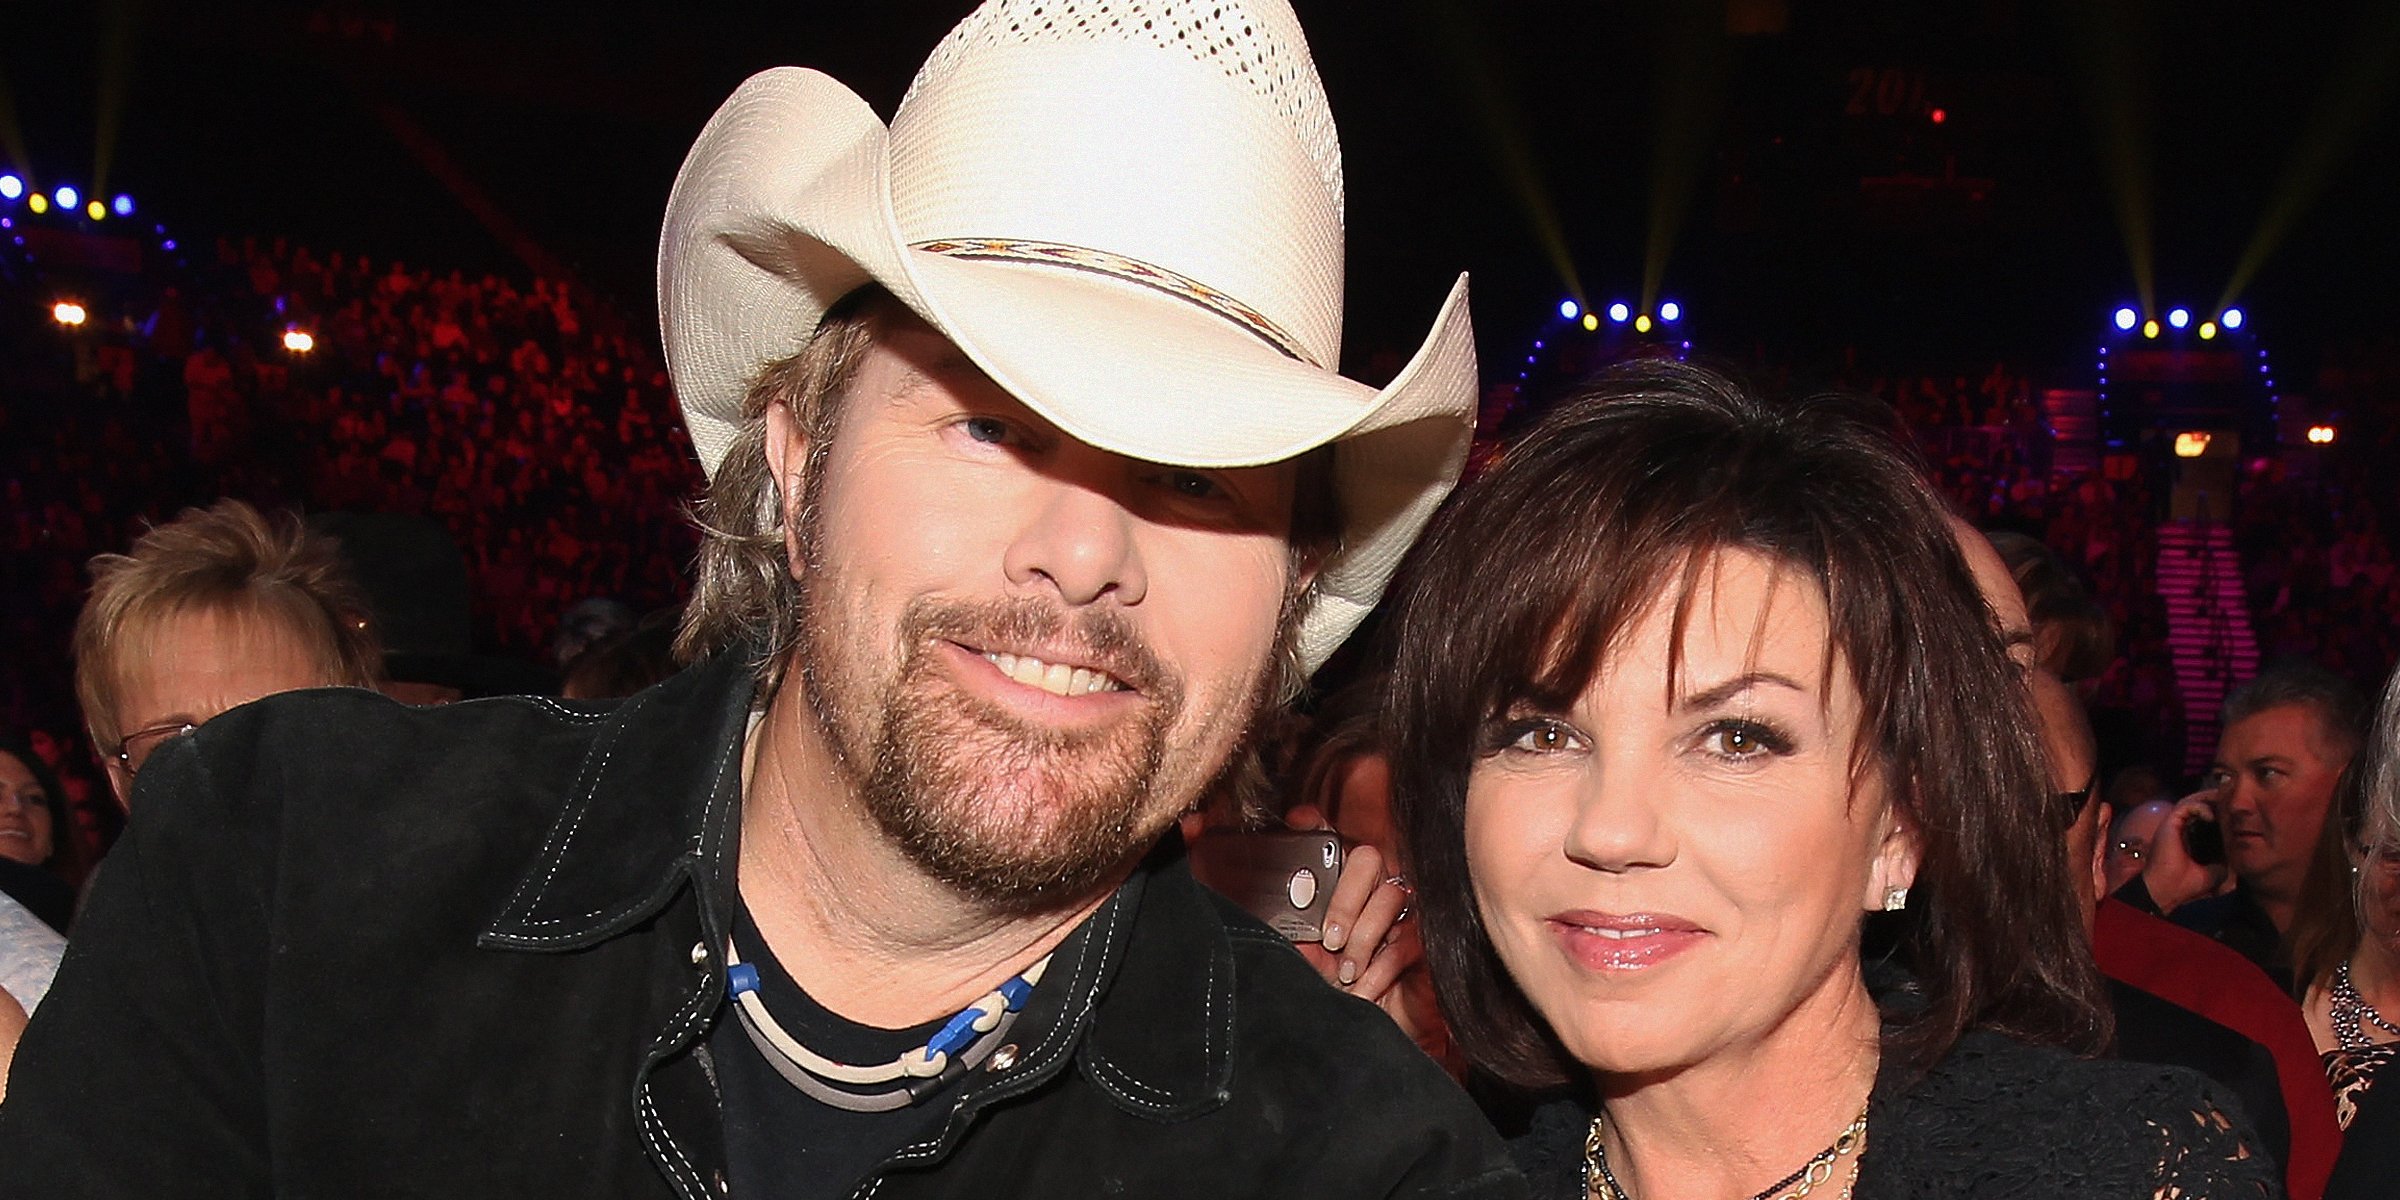 Toby Keith's Wife Remains by His Side through Chemo - They Met When He Didn't Have Money & Stayed Together for 38 Years